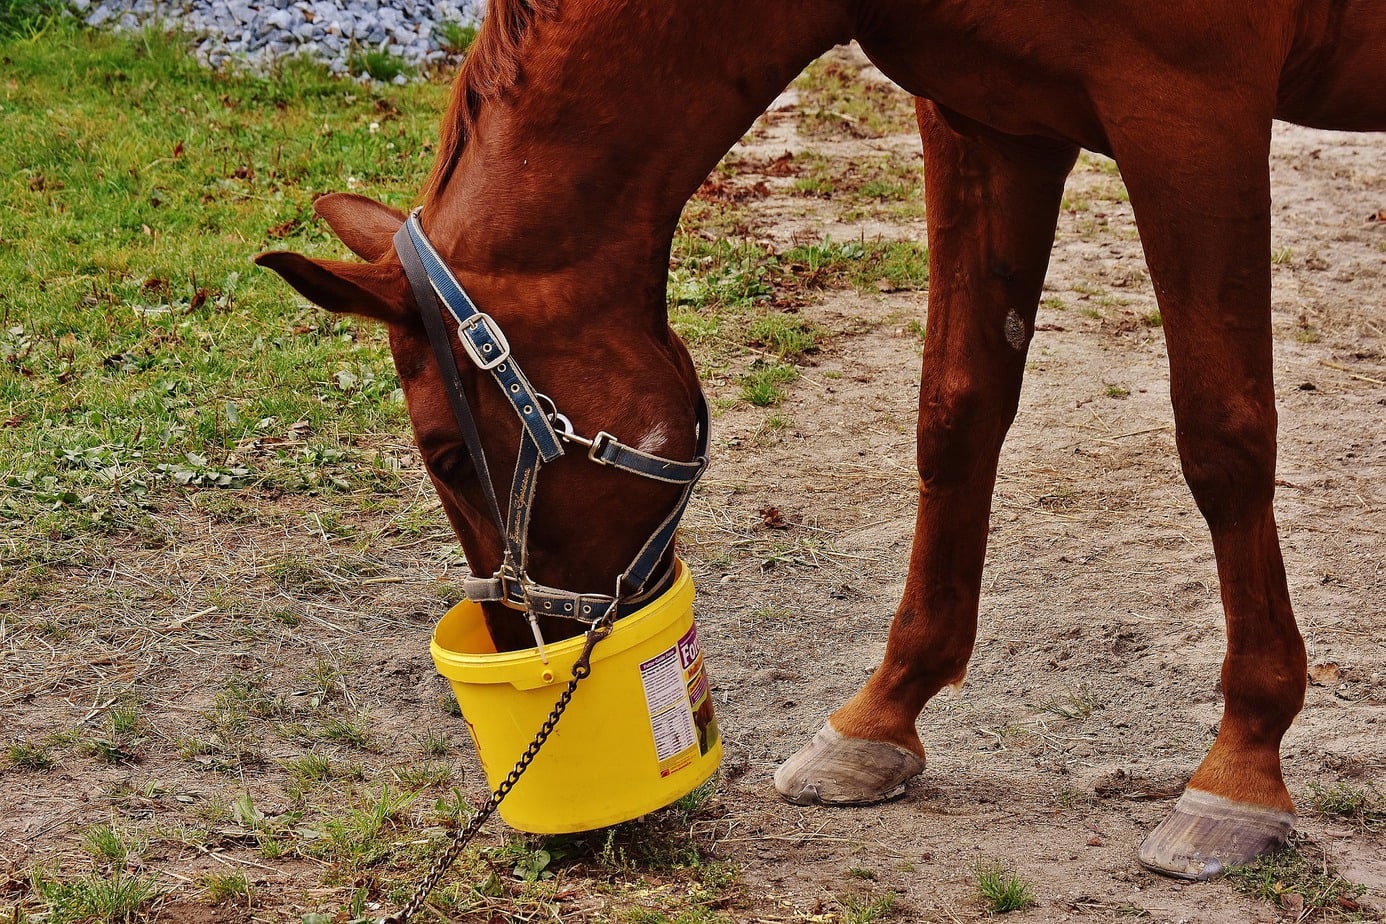 Principles of horse nutrition – what to feed your mount?